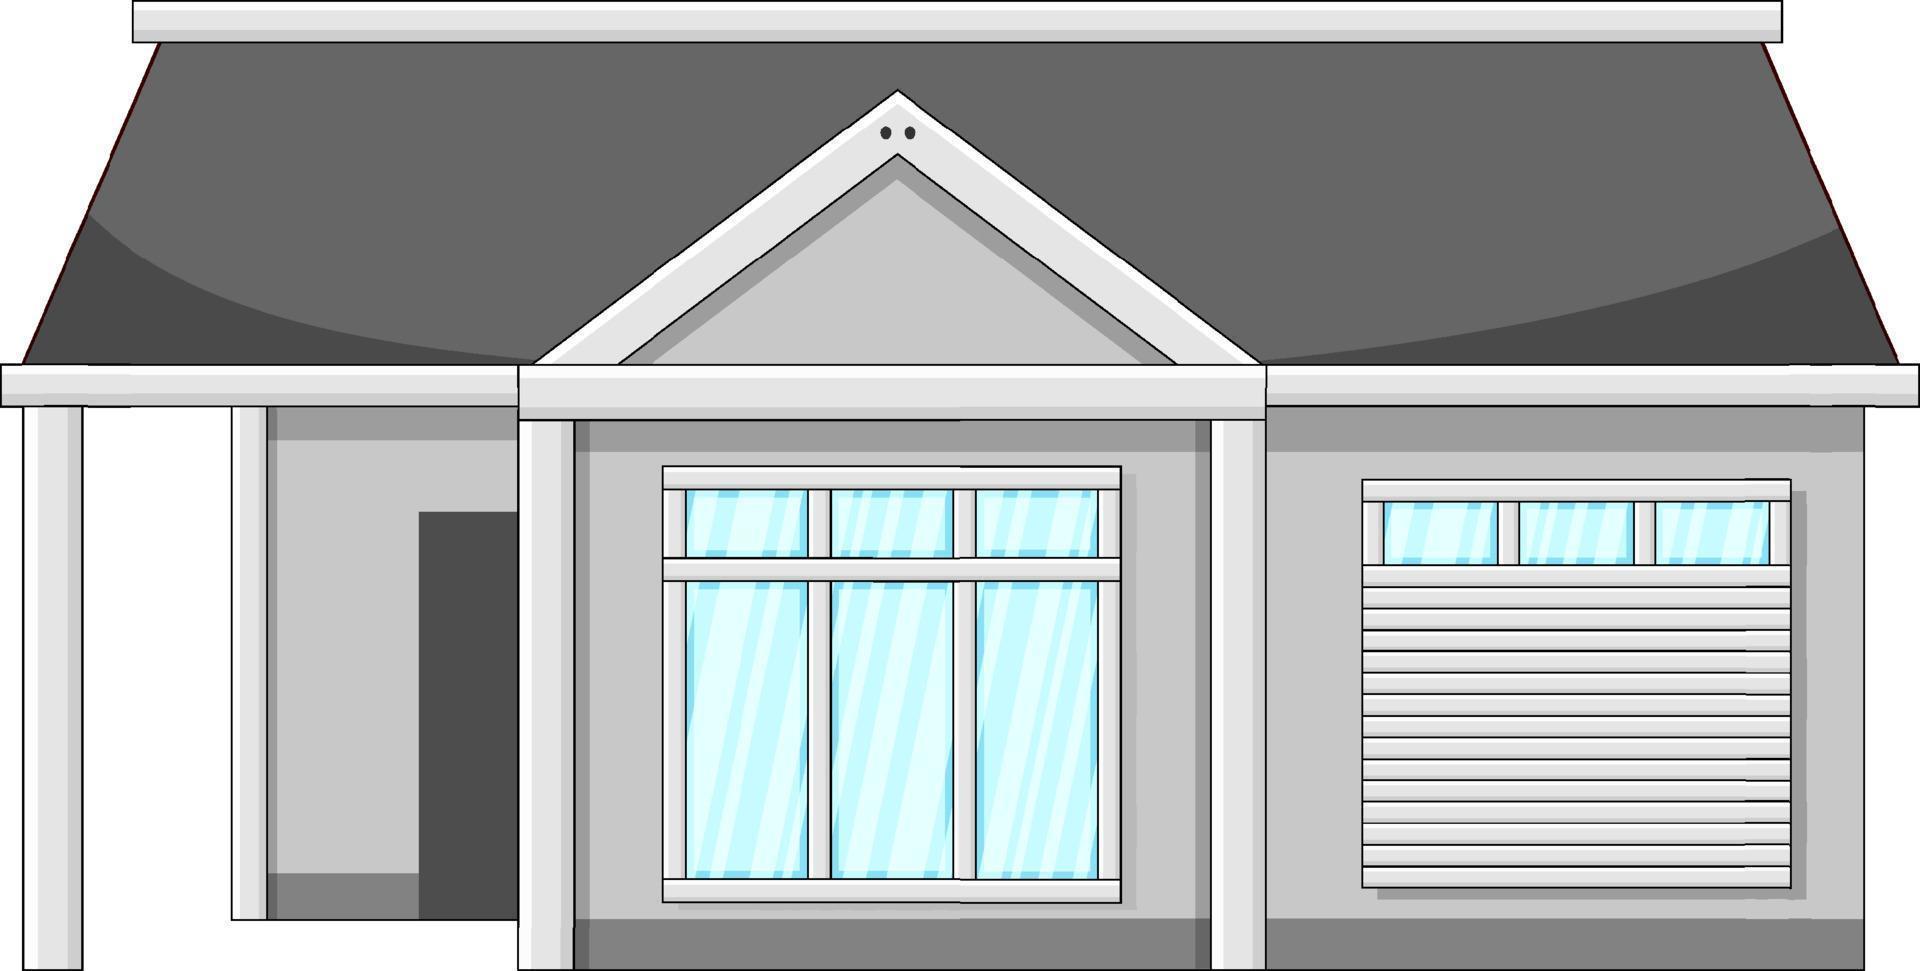 House with gray roof vector